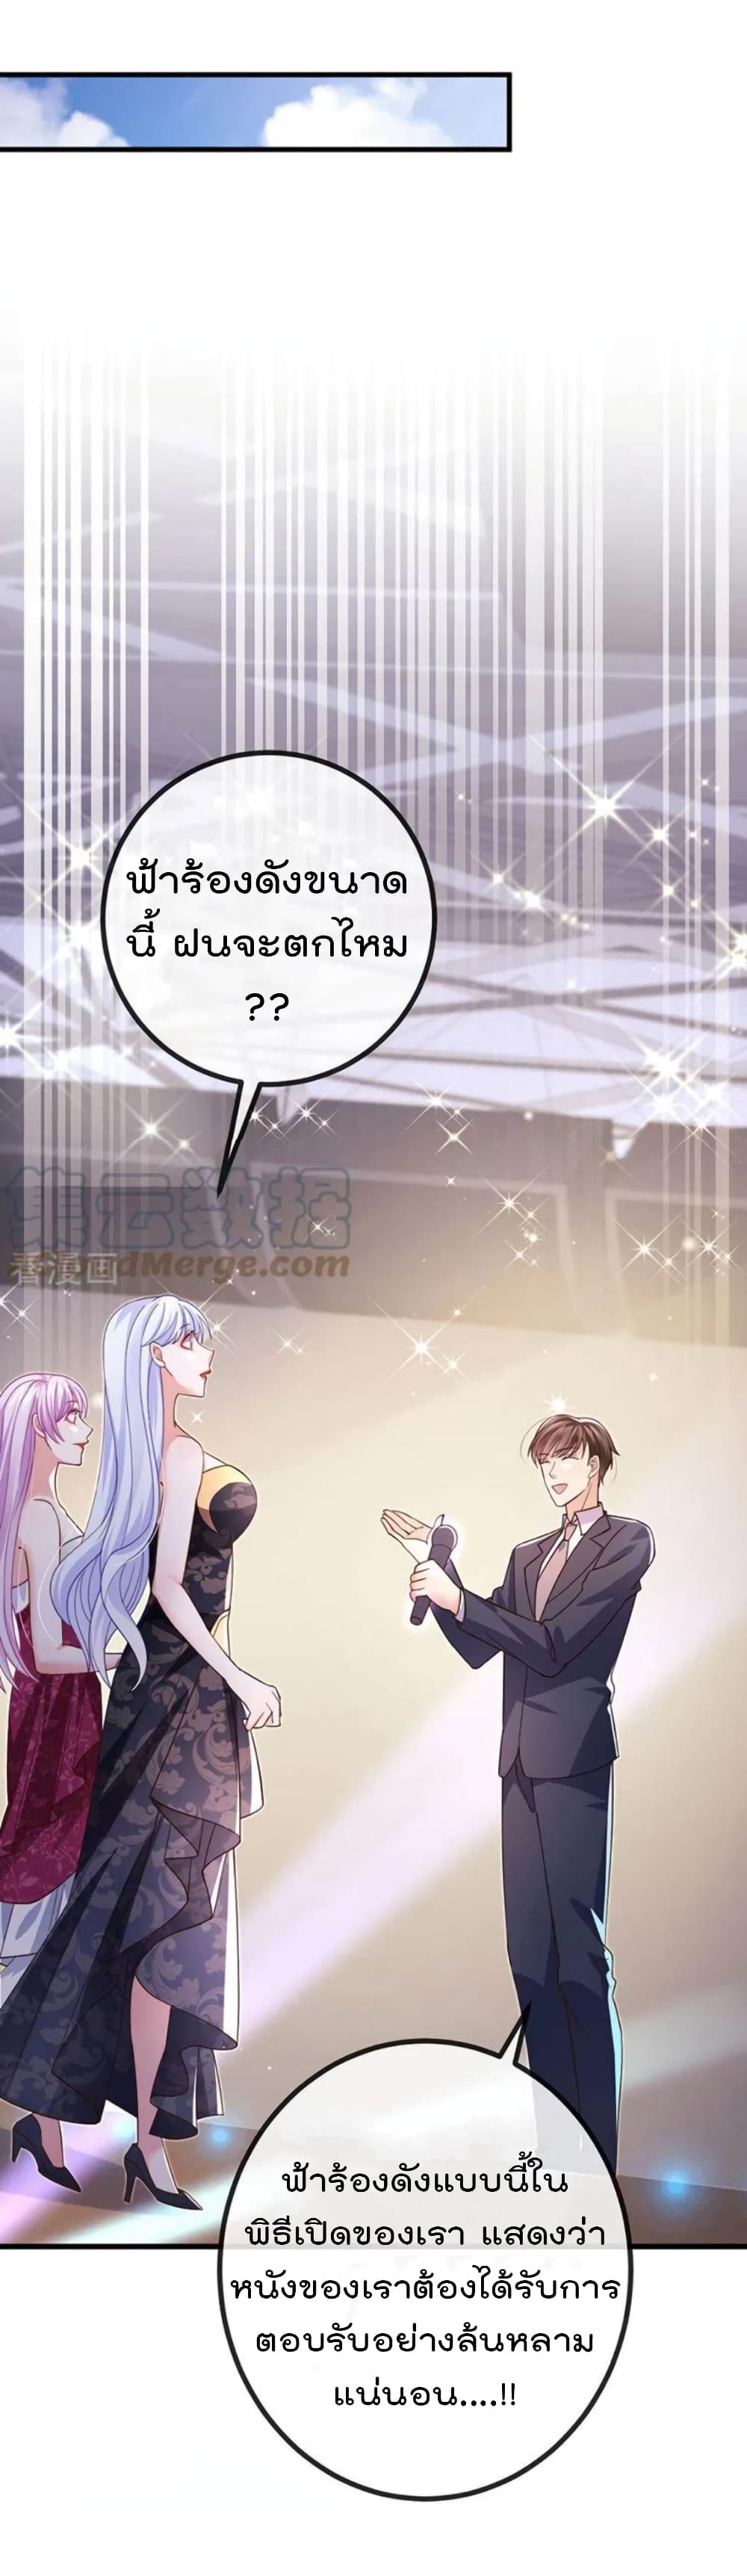 One Hundred Ways to Abuse Scum ตอนที่ 89 (17)